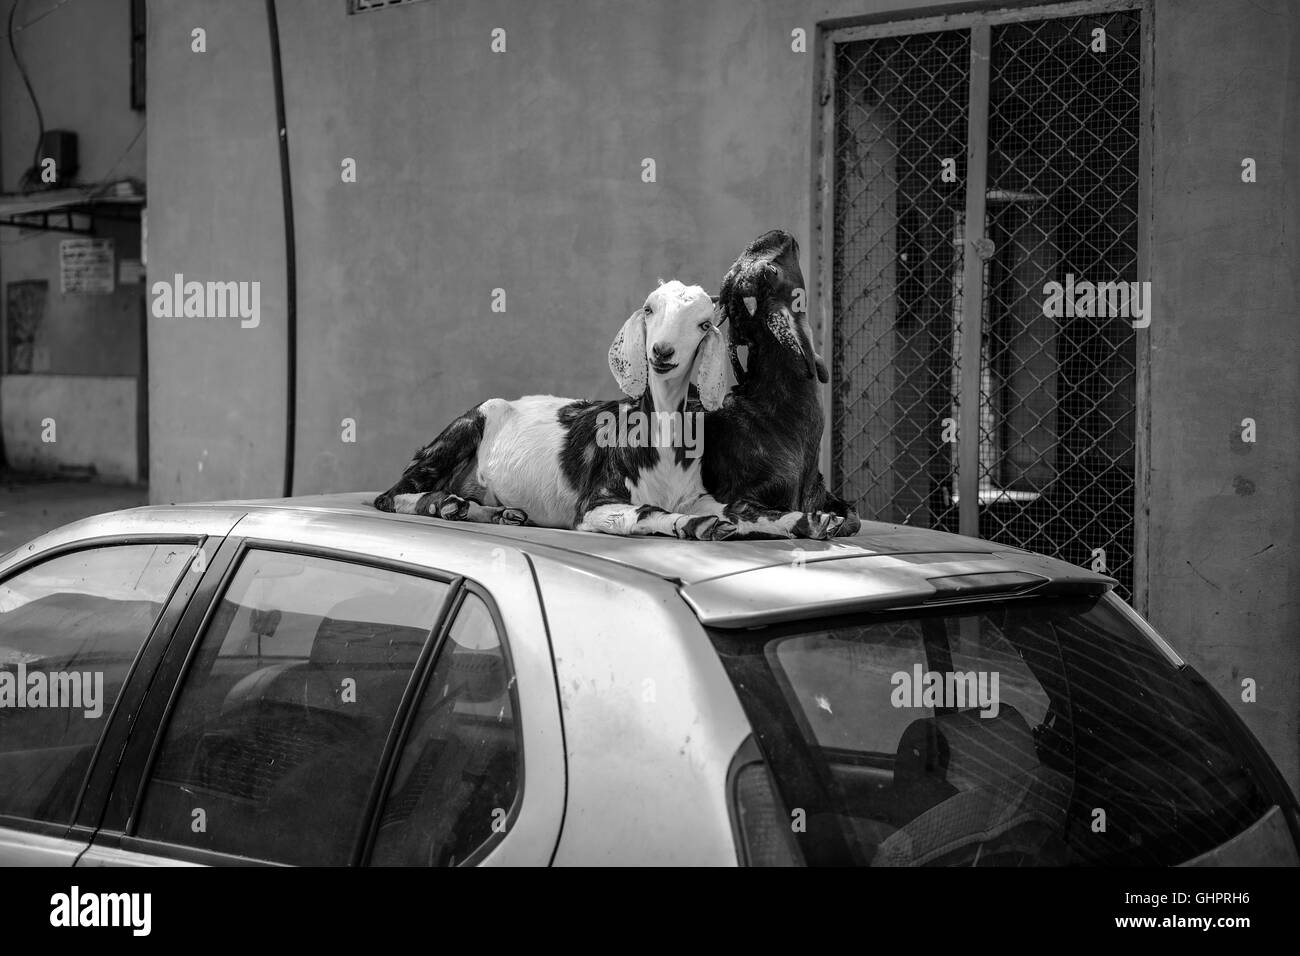 Two goats on a car Stock Photo